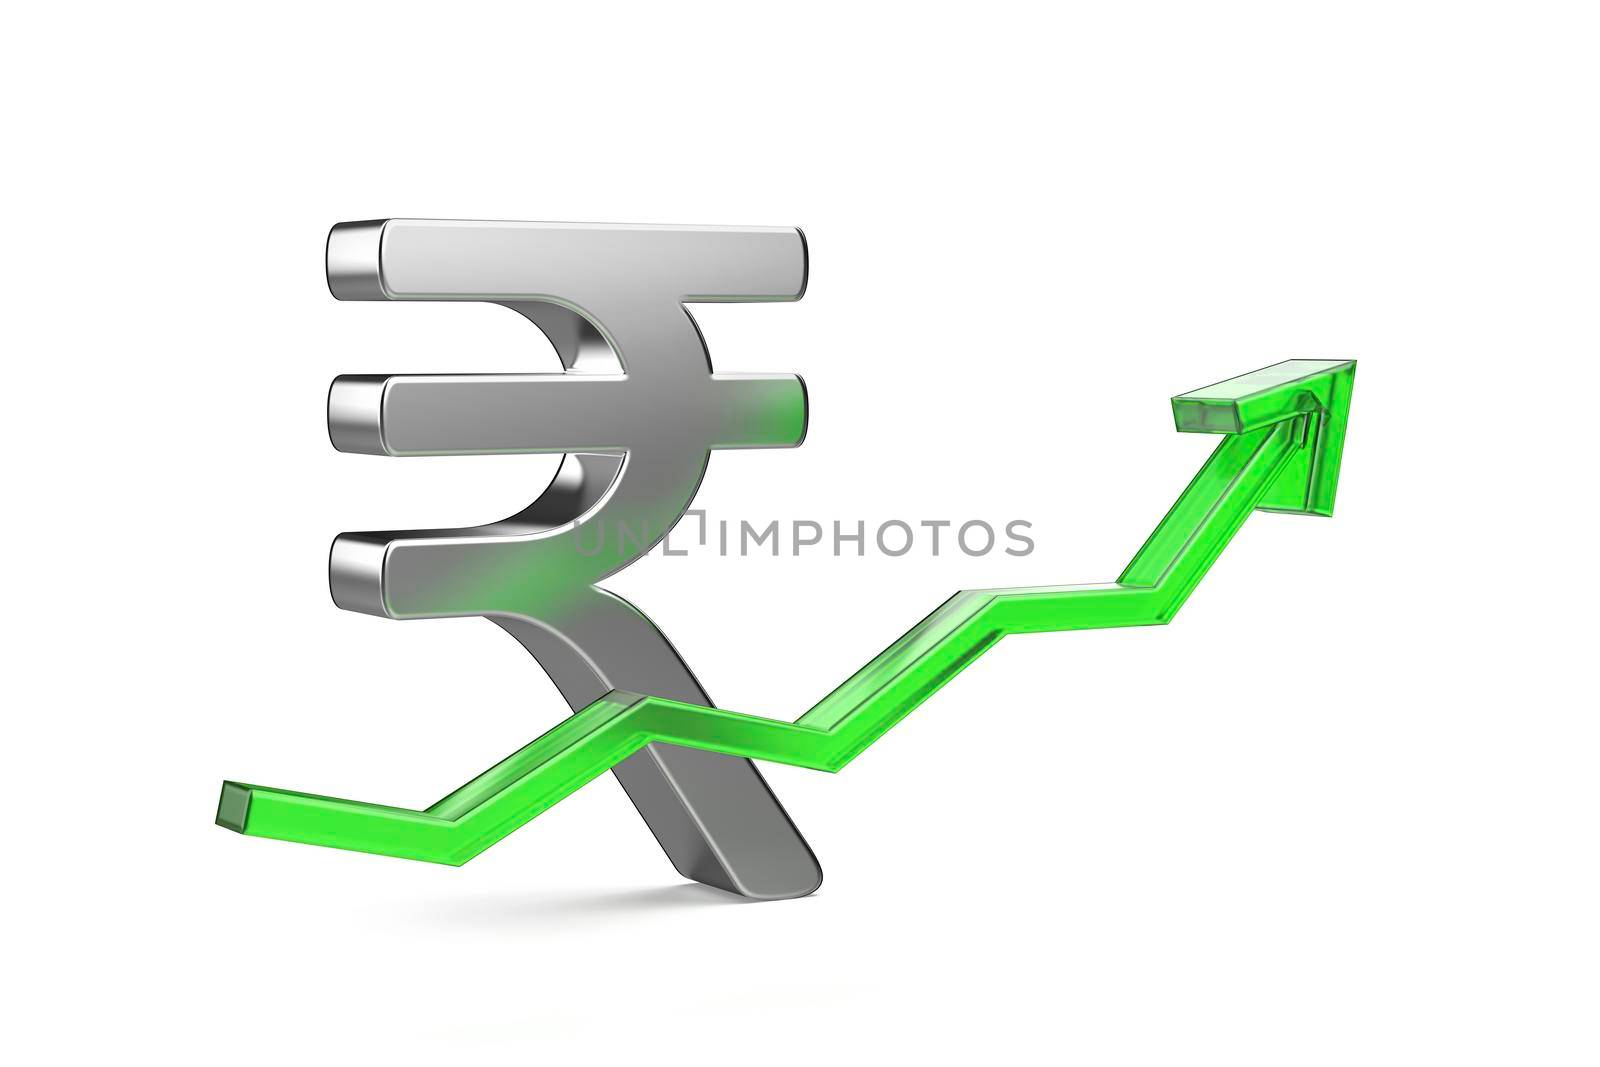 Indian rupee symbol with green arrow pointing up by magraphics